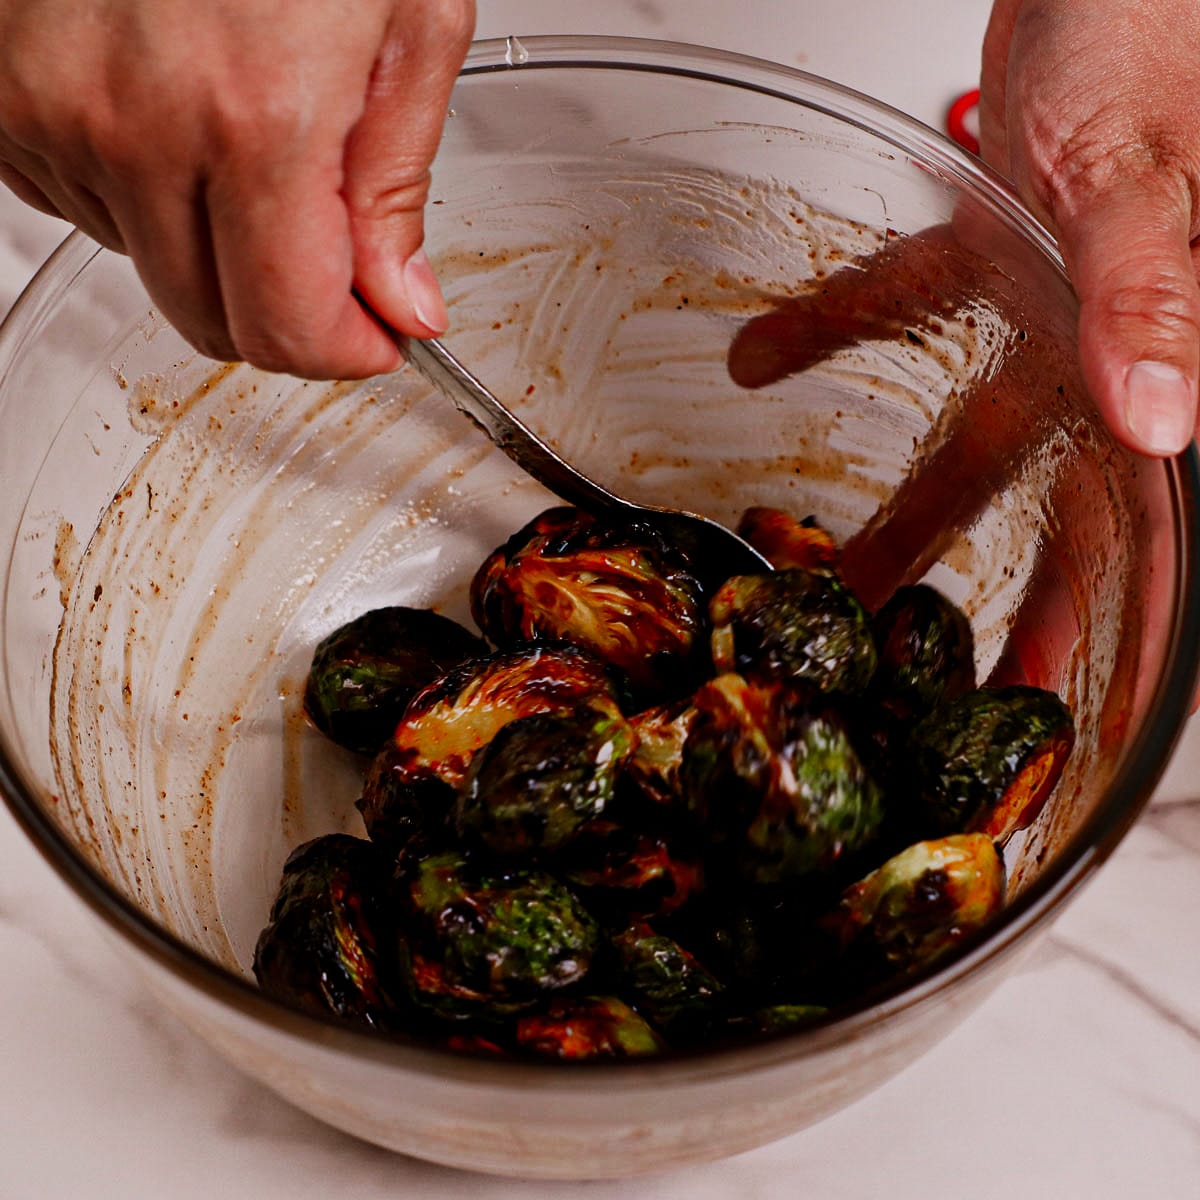 Coating roasted Brussels sprouts with honey sriracha sauce